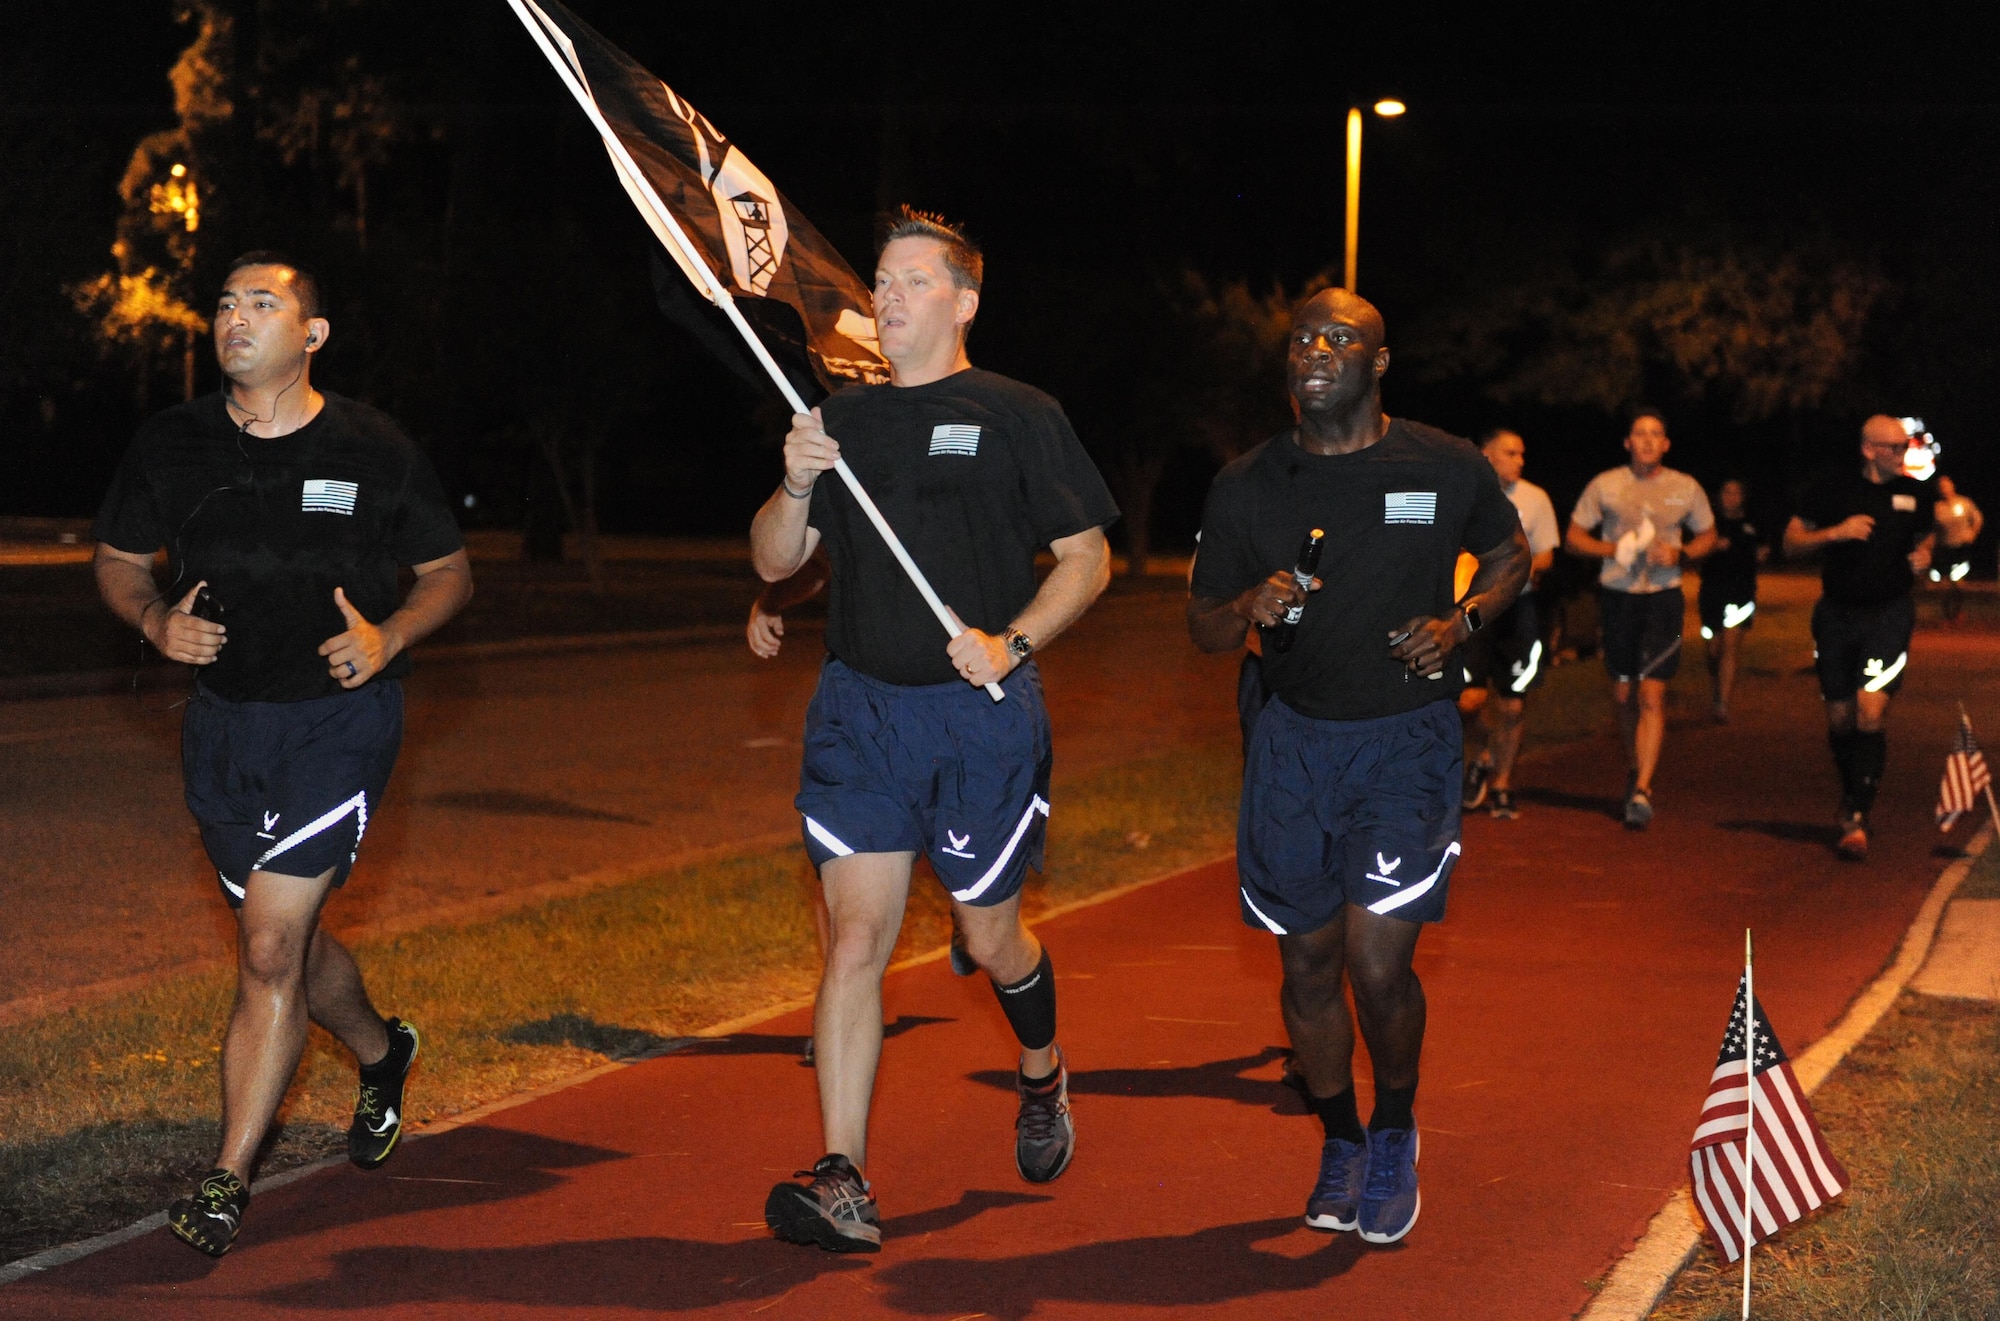 Col. C. Mike Smith, 81st Training Wing vice commander, and Chief Master Sgt. Vegas Clark, 81st TRW command chief, run the final laps during Keesler’s POW/MIA 24-hour memorial run and vigil at the Crotwell Track Sept. 16, 2016, on Keesler Air Force Base, Miss. More than 400 Keesler personnel participated in the event, to include runners and readers. Participants ran more than 1,500 miles and raised $1,400, which will be donated to a POW/MIA memorial fund. (U.S. Air Force photo by Kemberly Groue/Released)